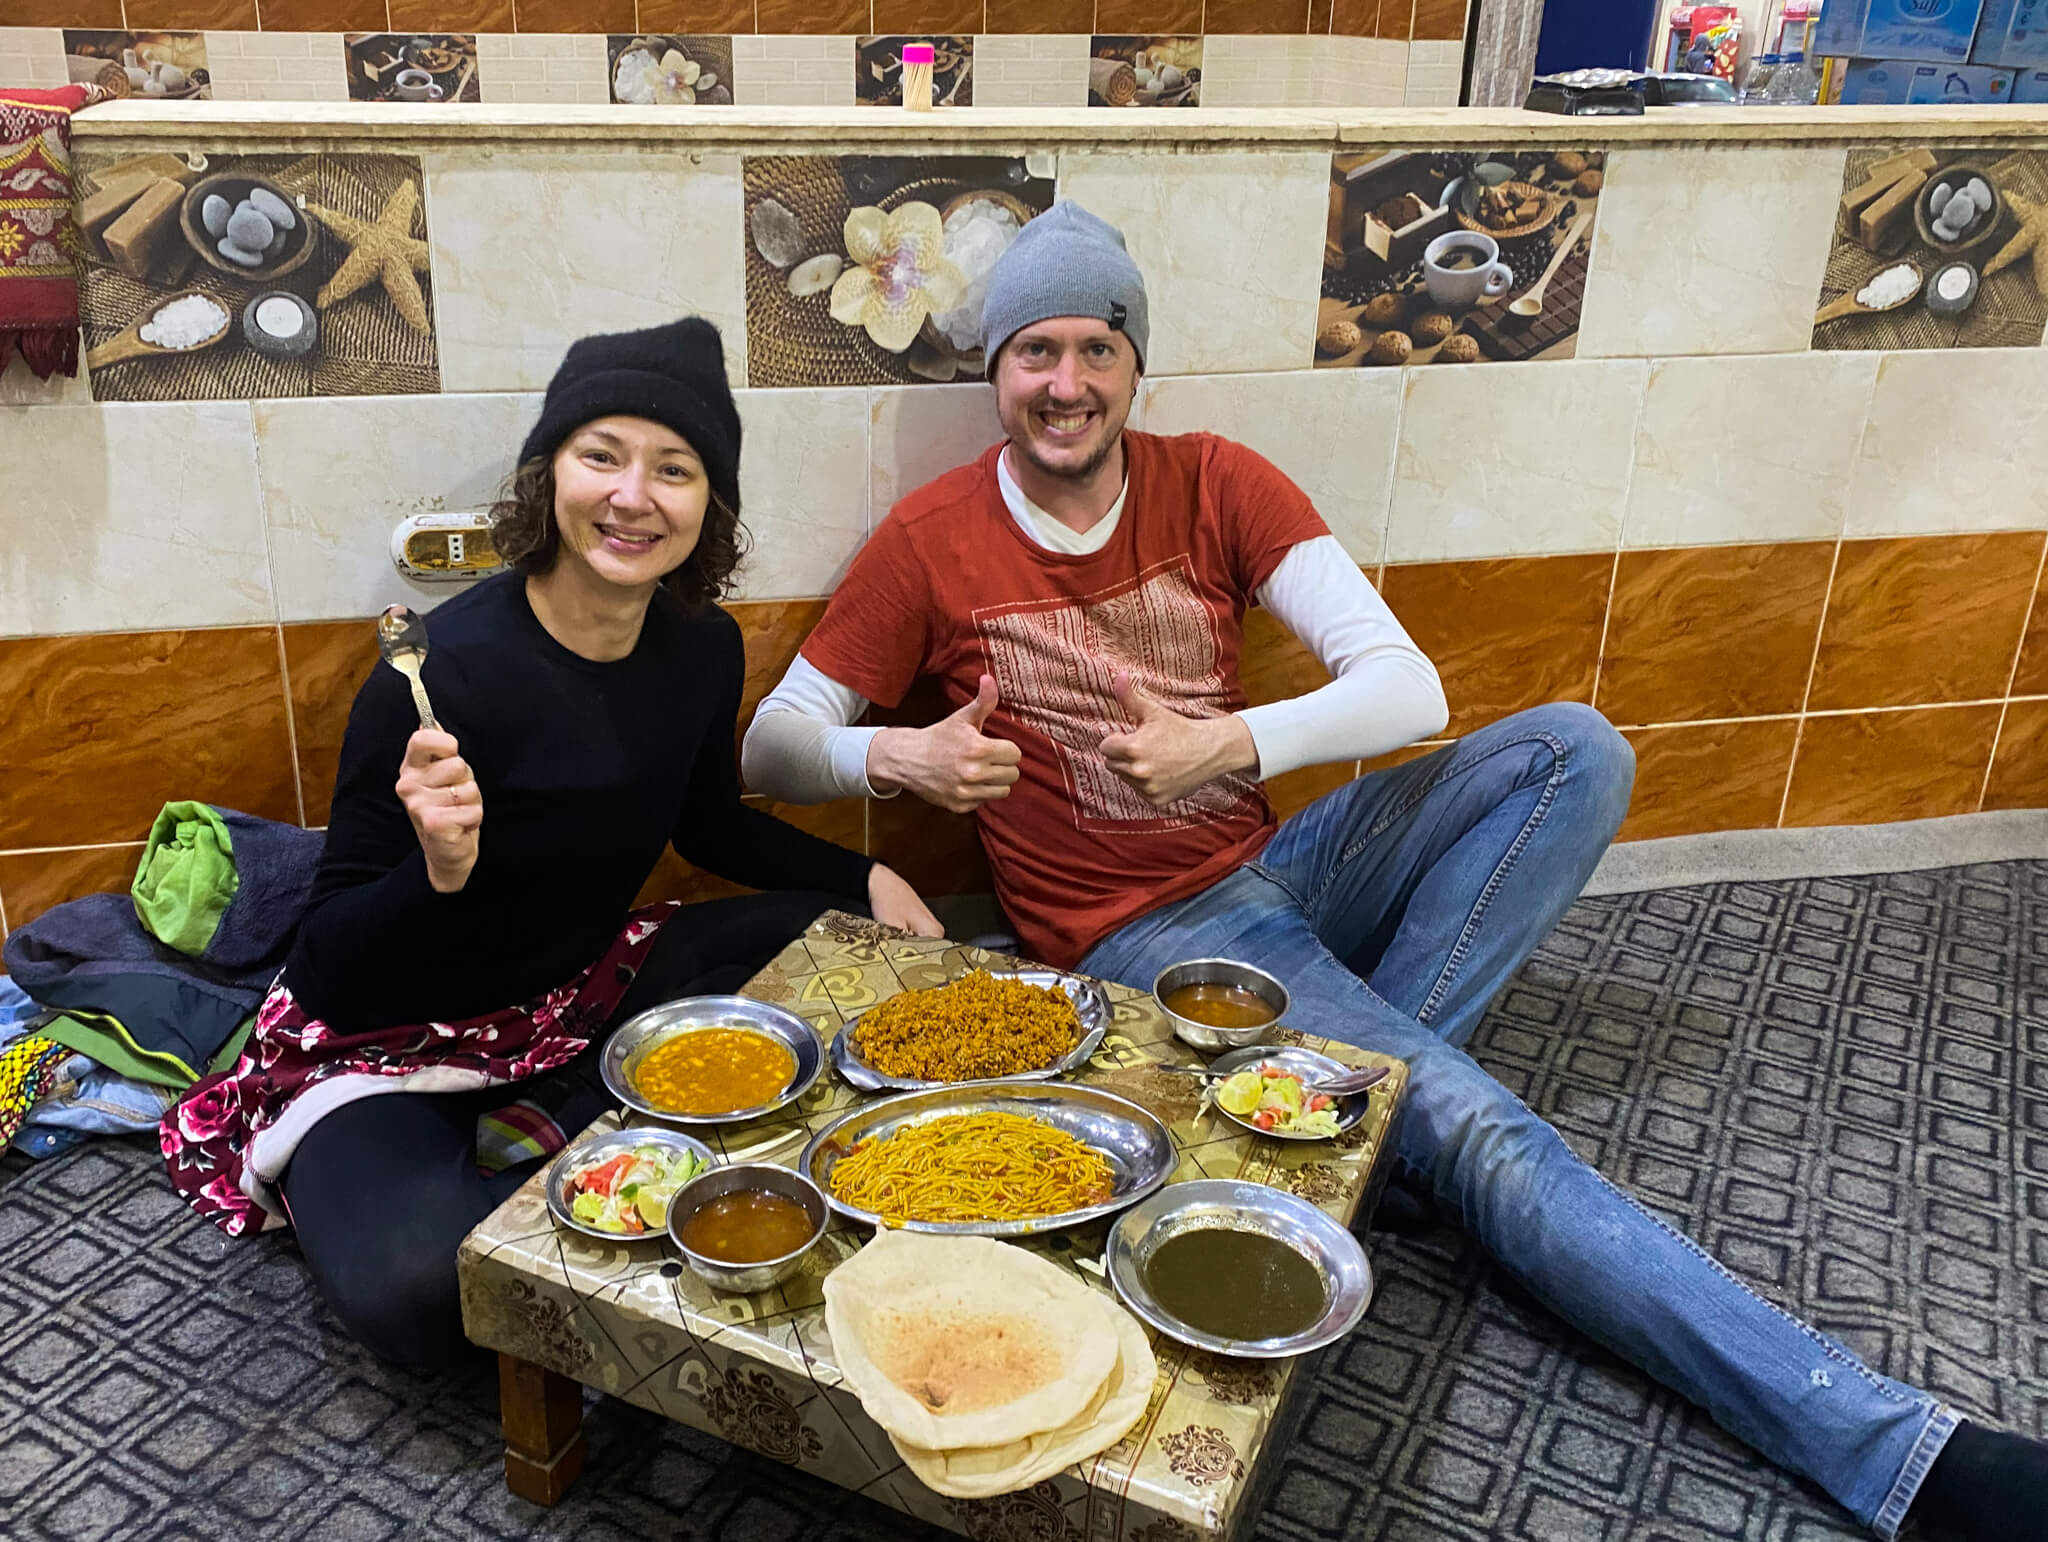 Me and Anna eating local Egyptian food while sitting on the floor.